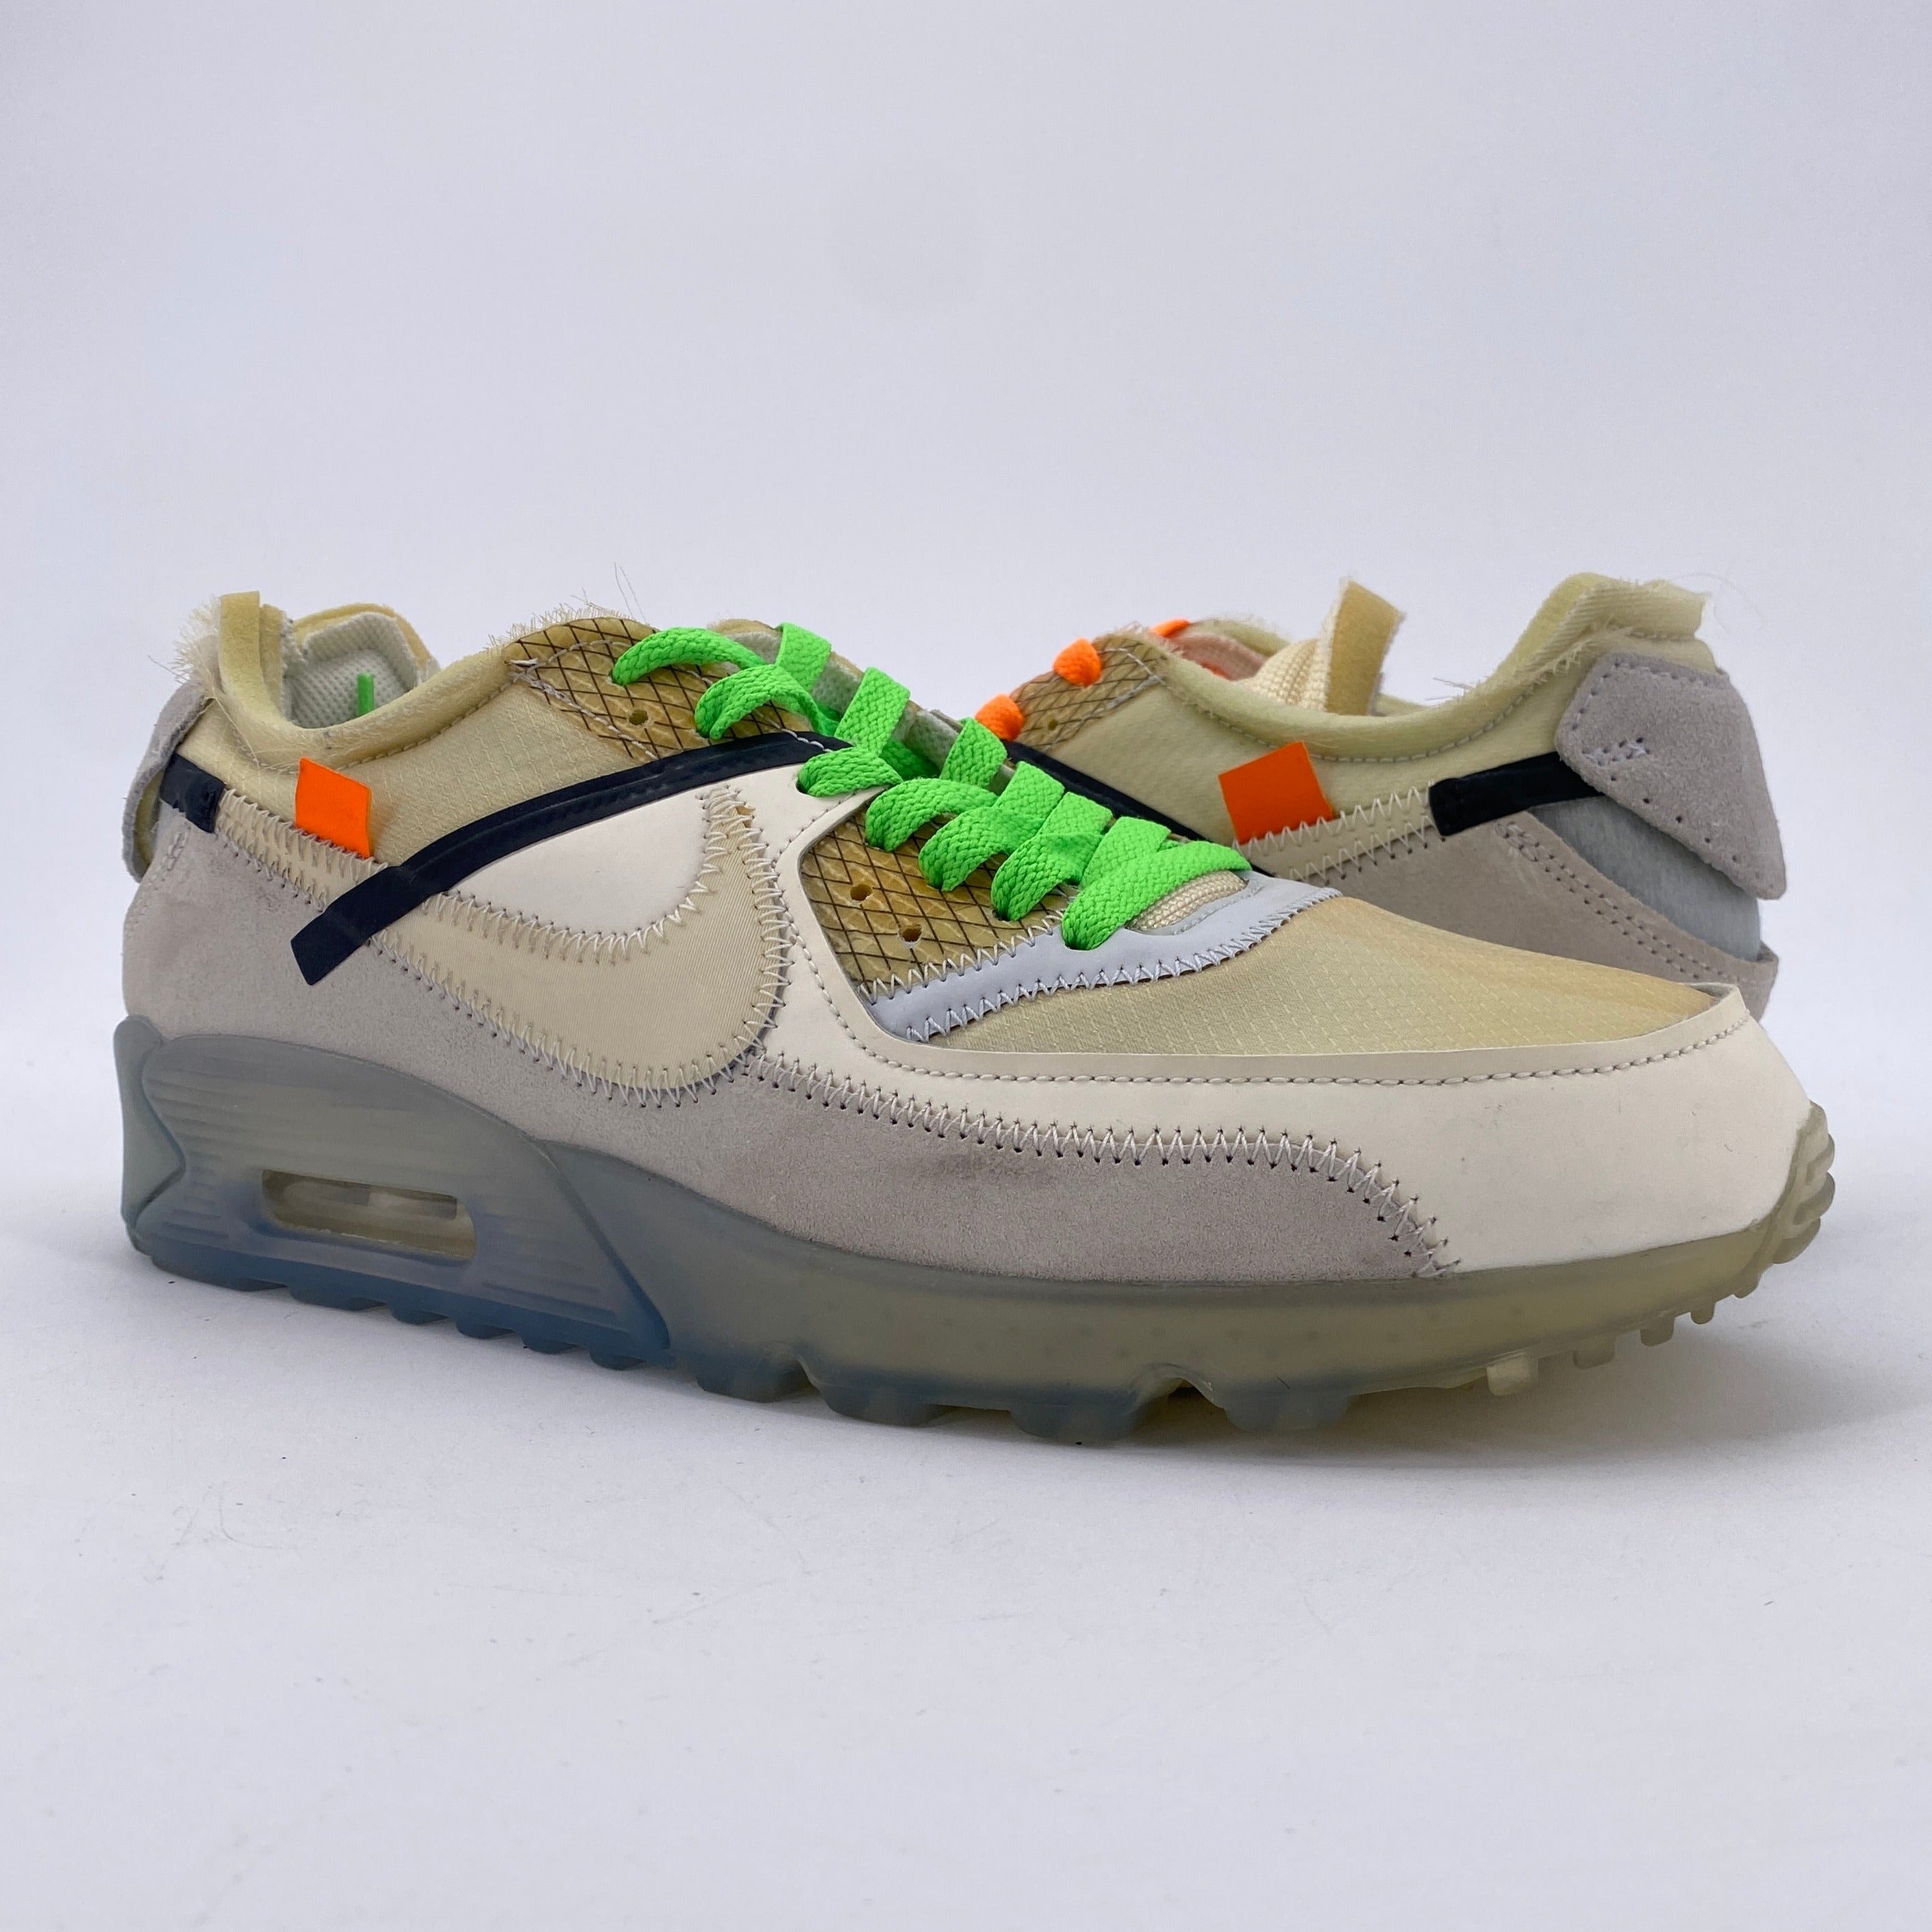 Nike Air Max 90 / OW "The 10: Off-White" 2017 Used Size 9